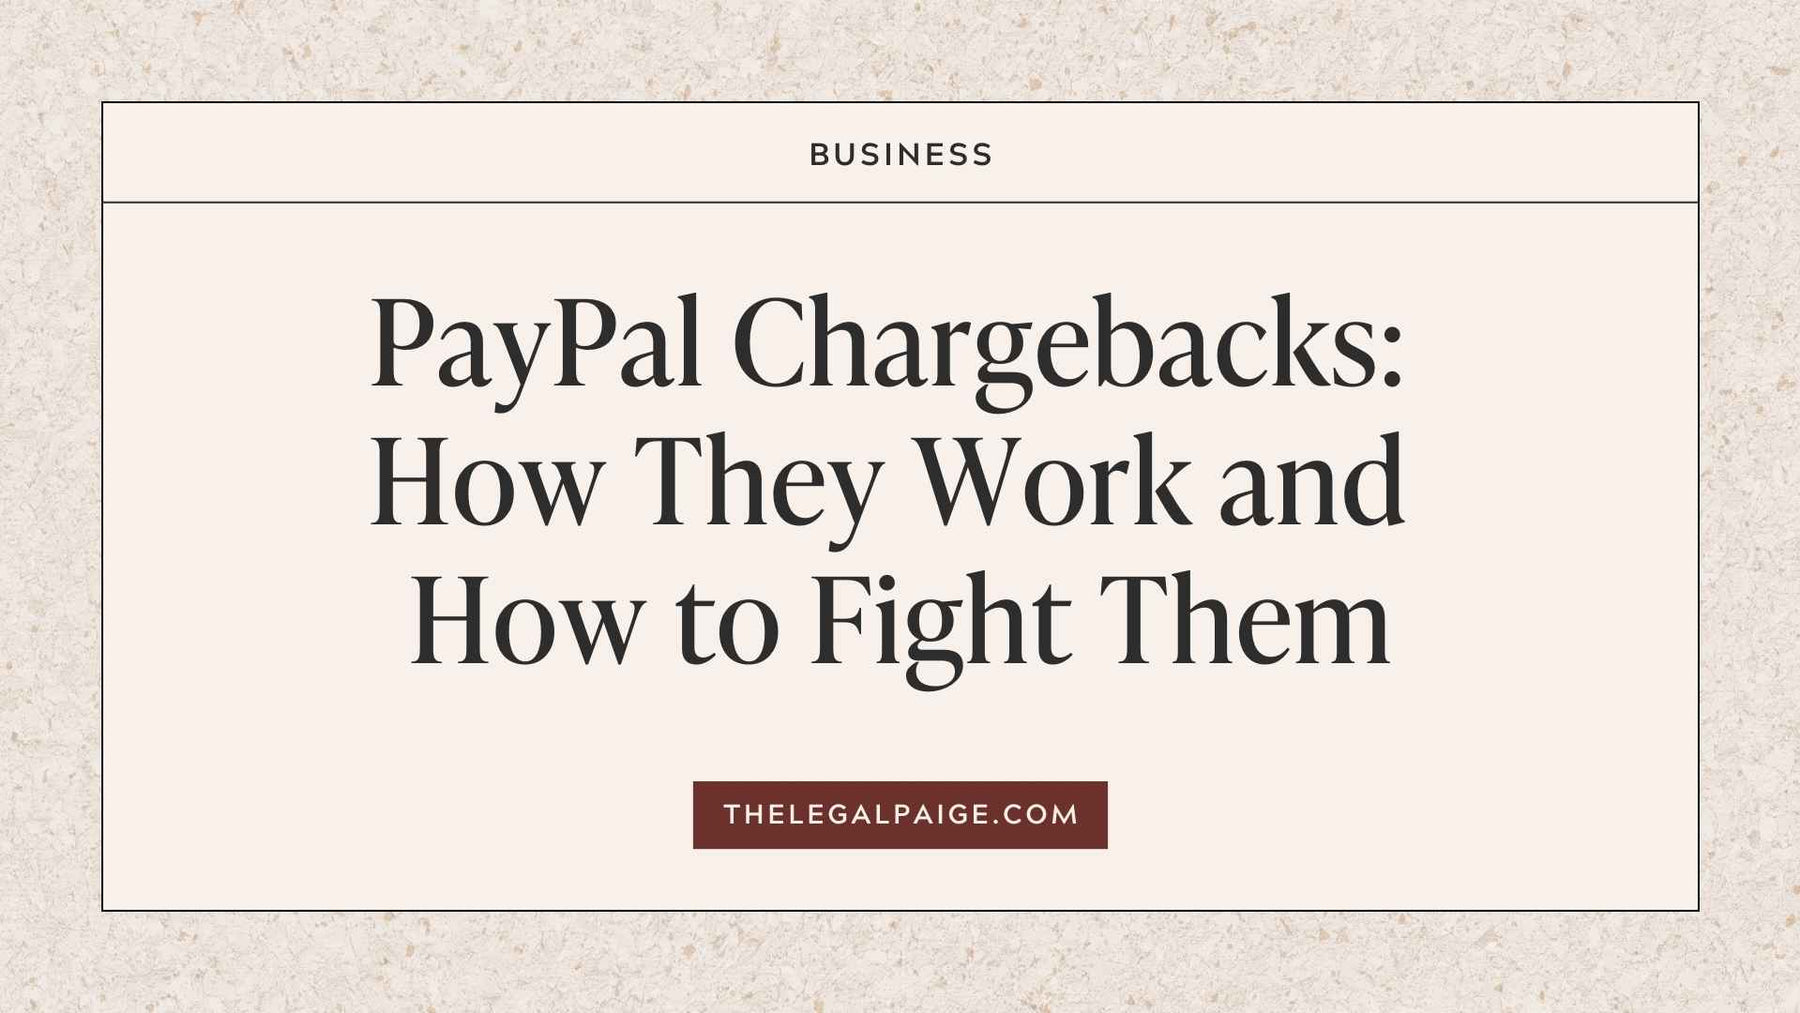 PayPal Chargebacks: How They Work and How to Fight Them